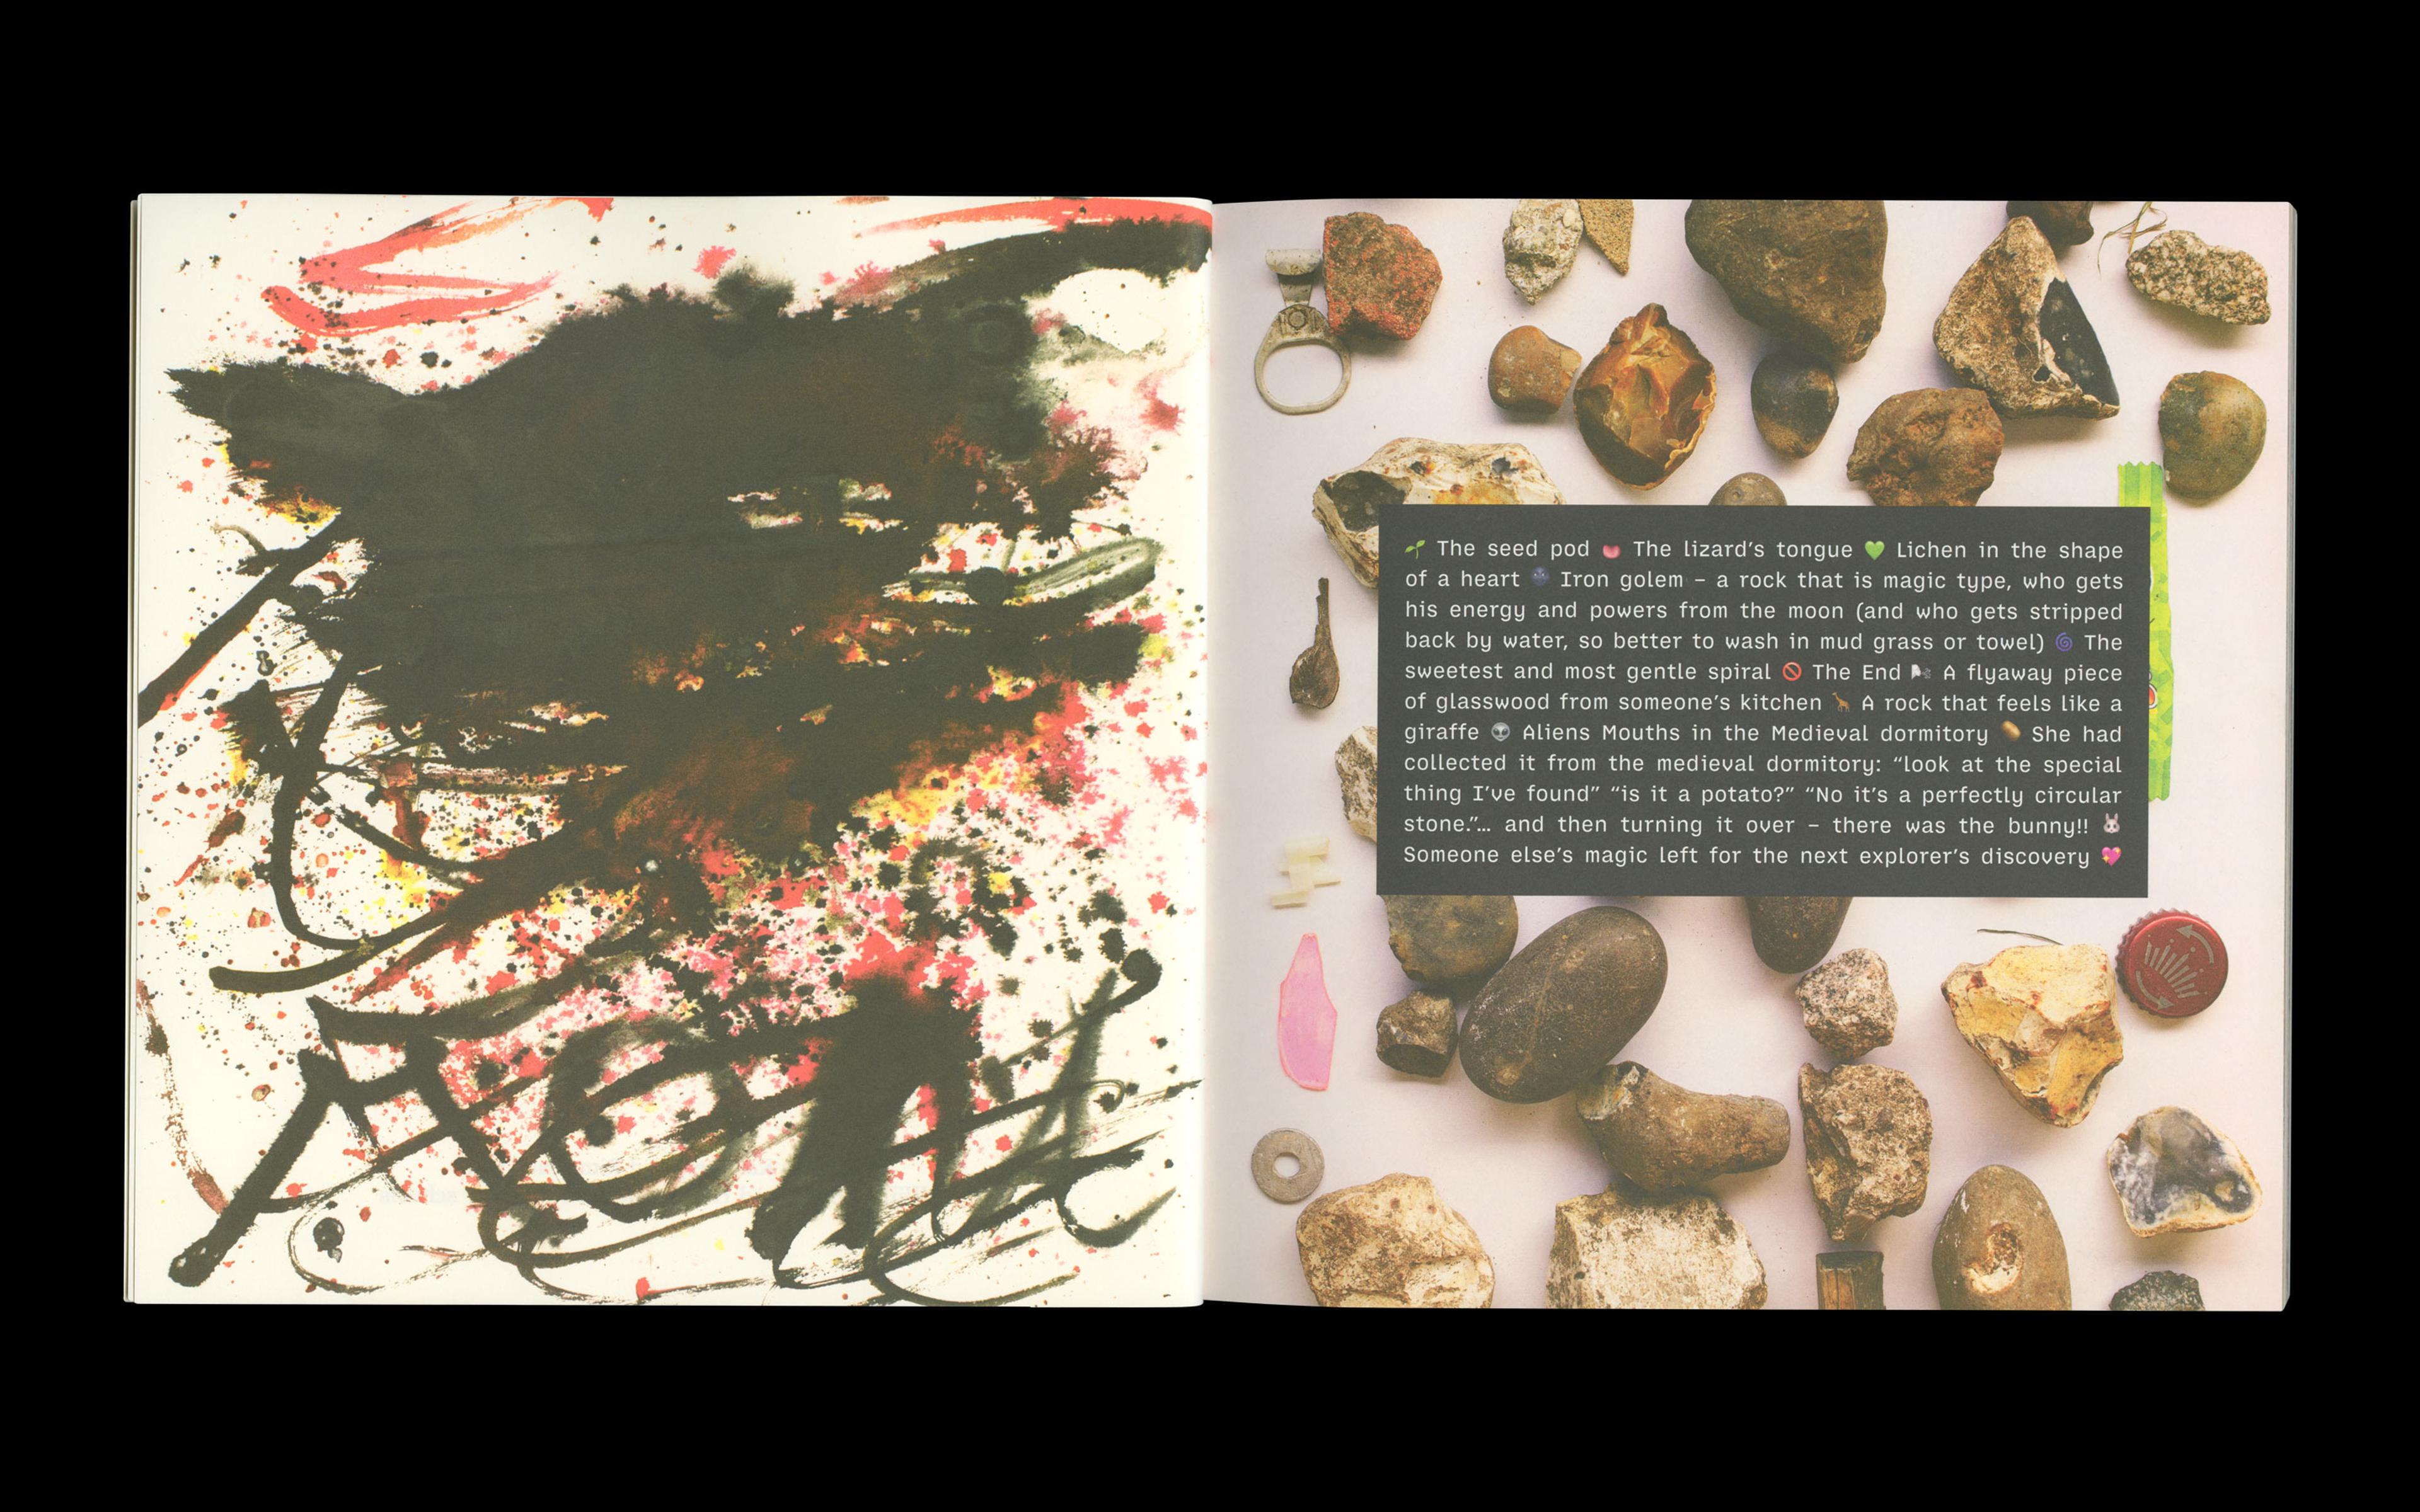 Scan of internal spread from The Brightness of Juju by Dunya Kalantery and Rima Patel showing child's ink work and photo collage